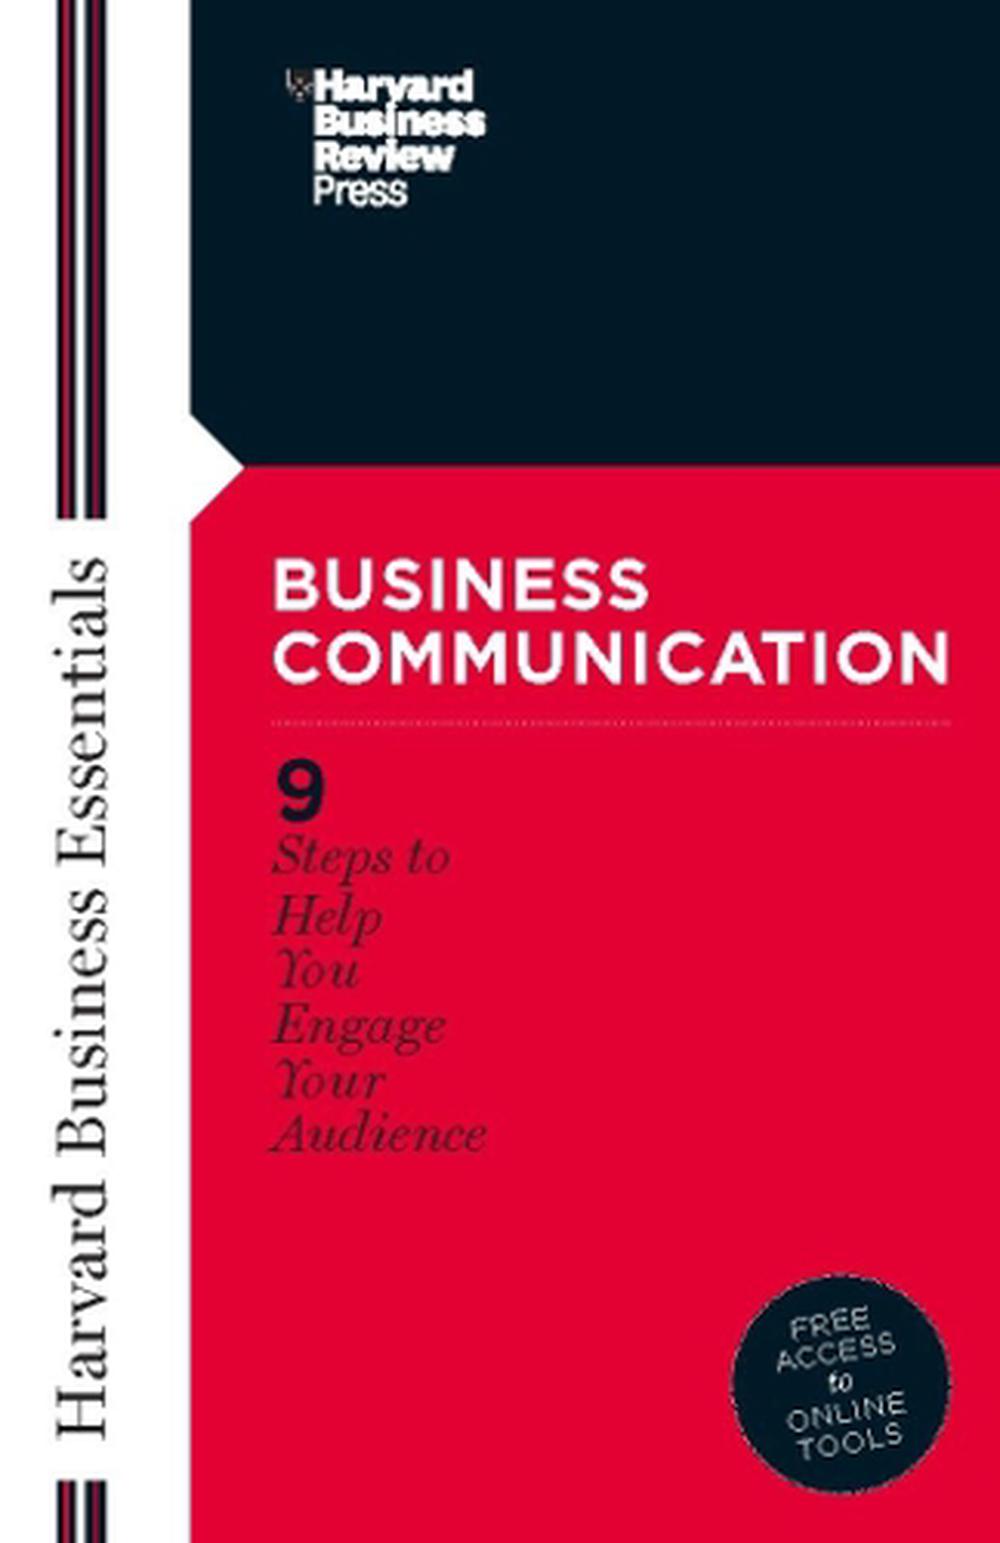 9781591391135　The　Harvard　by　at　online　Paperback,　Buy　Business　Review,　Communication　Business　Nile